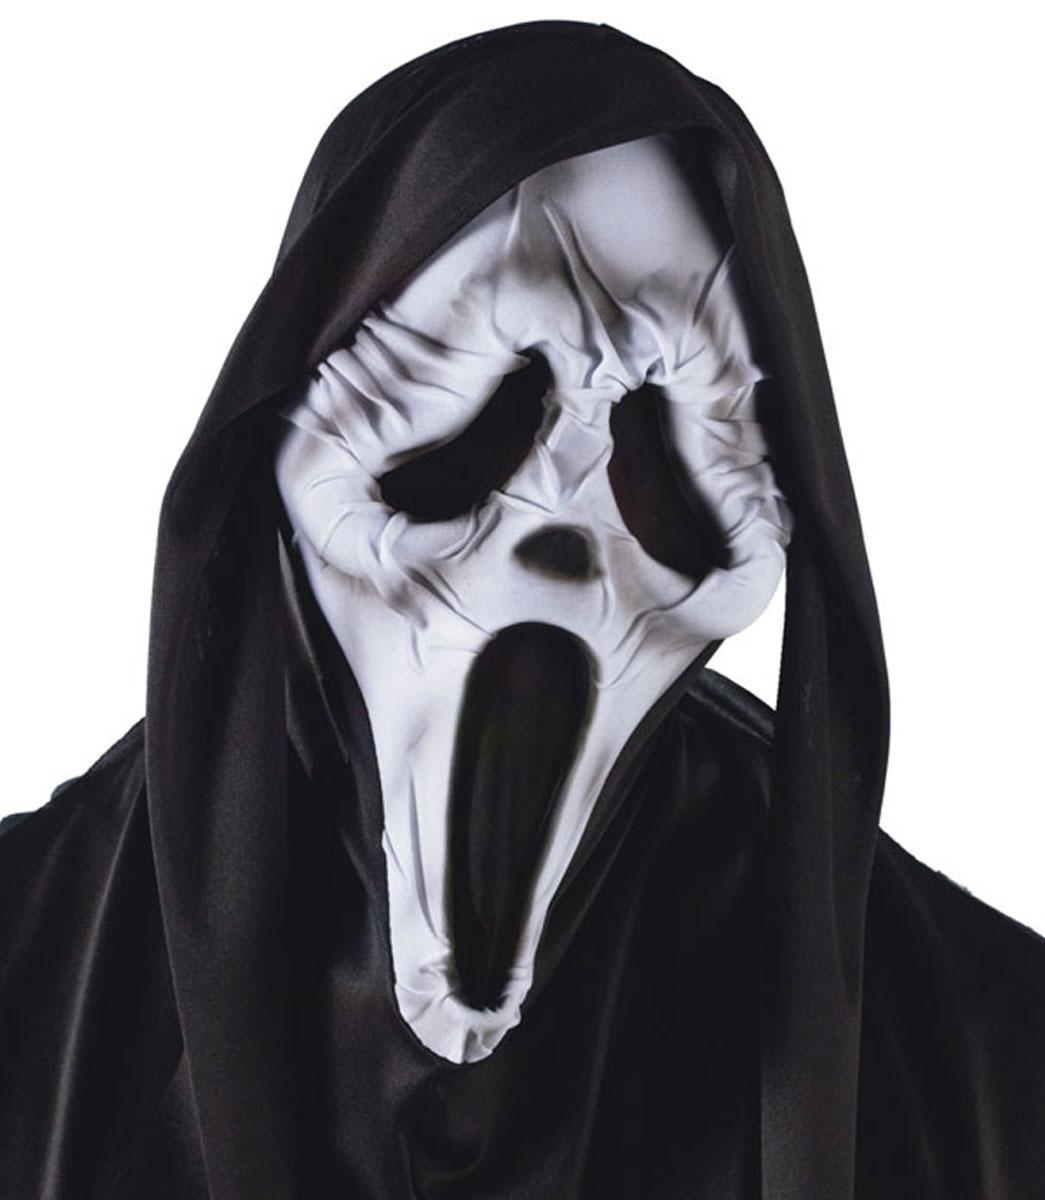 Ghost Face Wrinkled Mask by Fun World 93226 available in the UK here at Karnival Costumes online Halloween shop